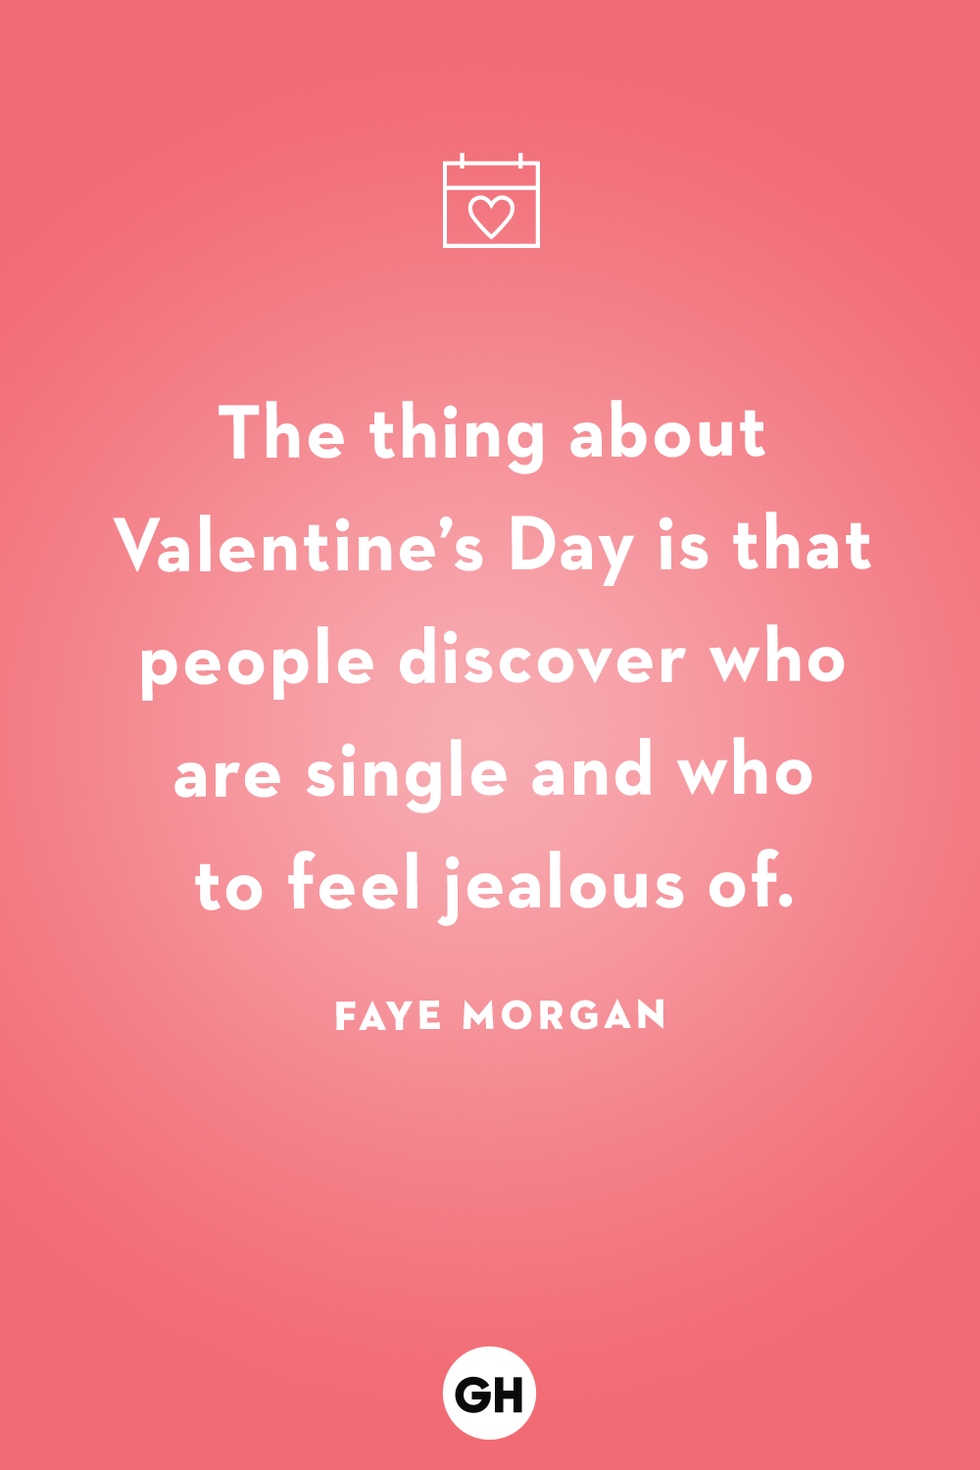 60 Best Funny Valentine's Day Quotes for Couples, Friends & Co-Workers